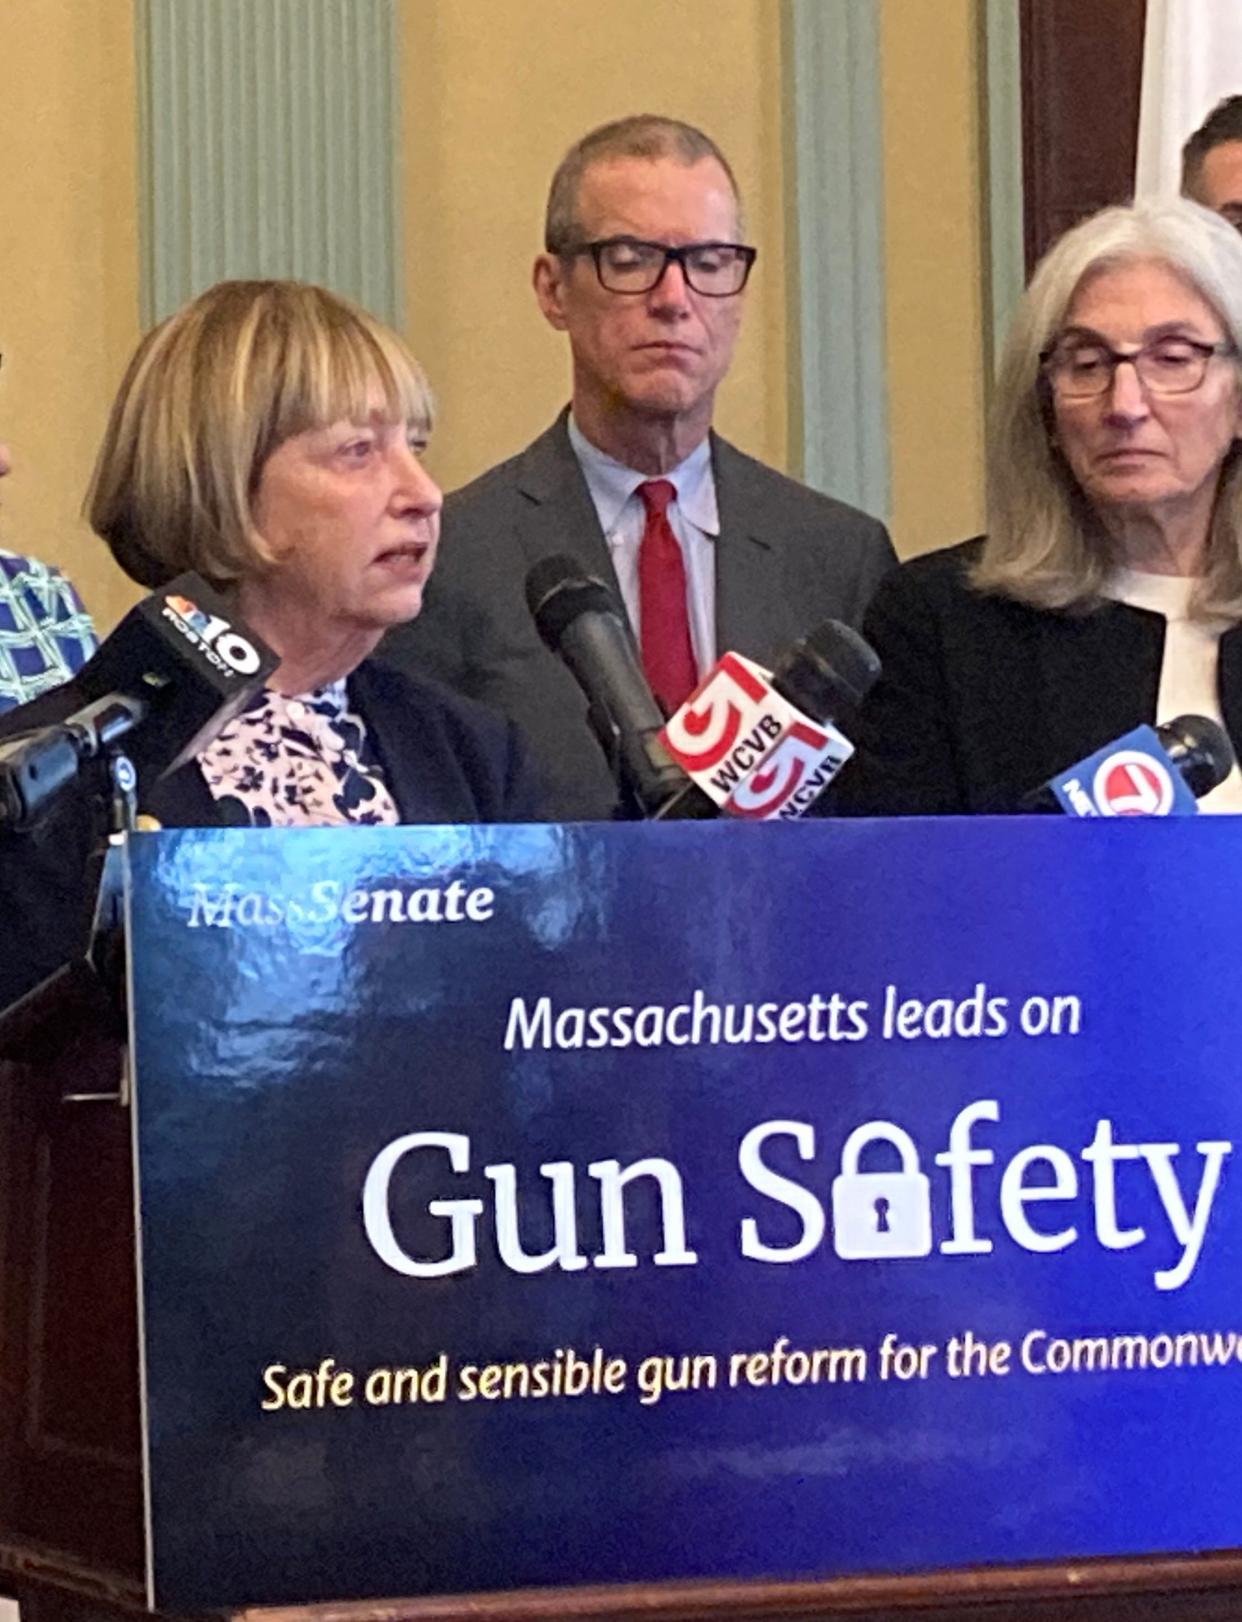 Senate Majority Leader Cynthia Creem discusses the details of the the Gun SAFETY bill, filed Thursday, Jan. 25 and scheduled for a floor vote in the Senate, Feb. 1